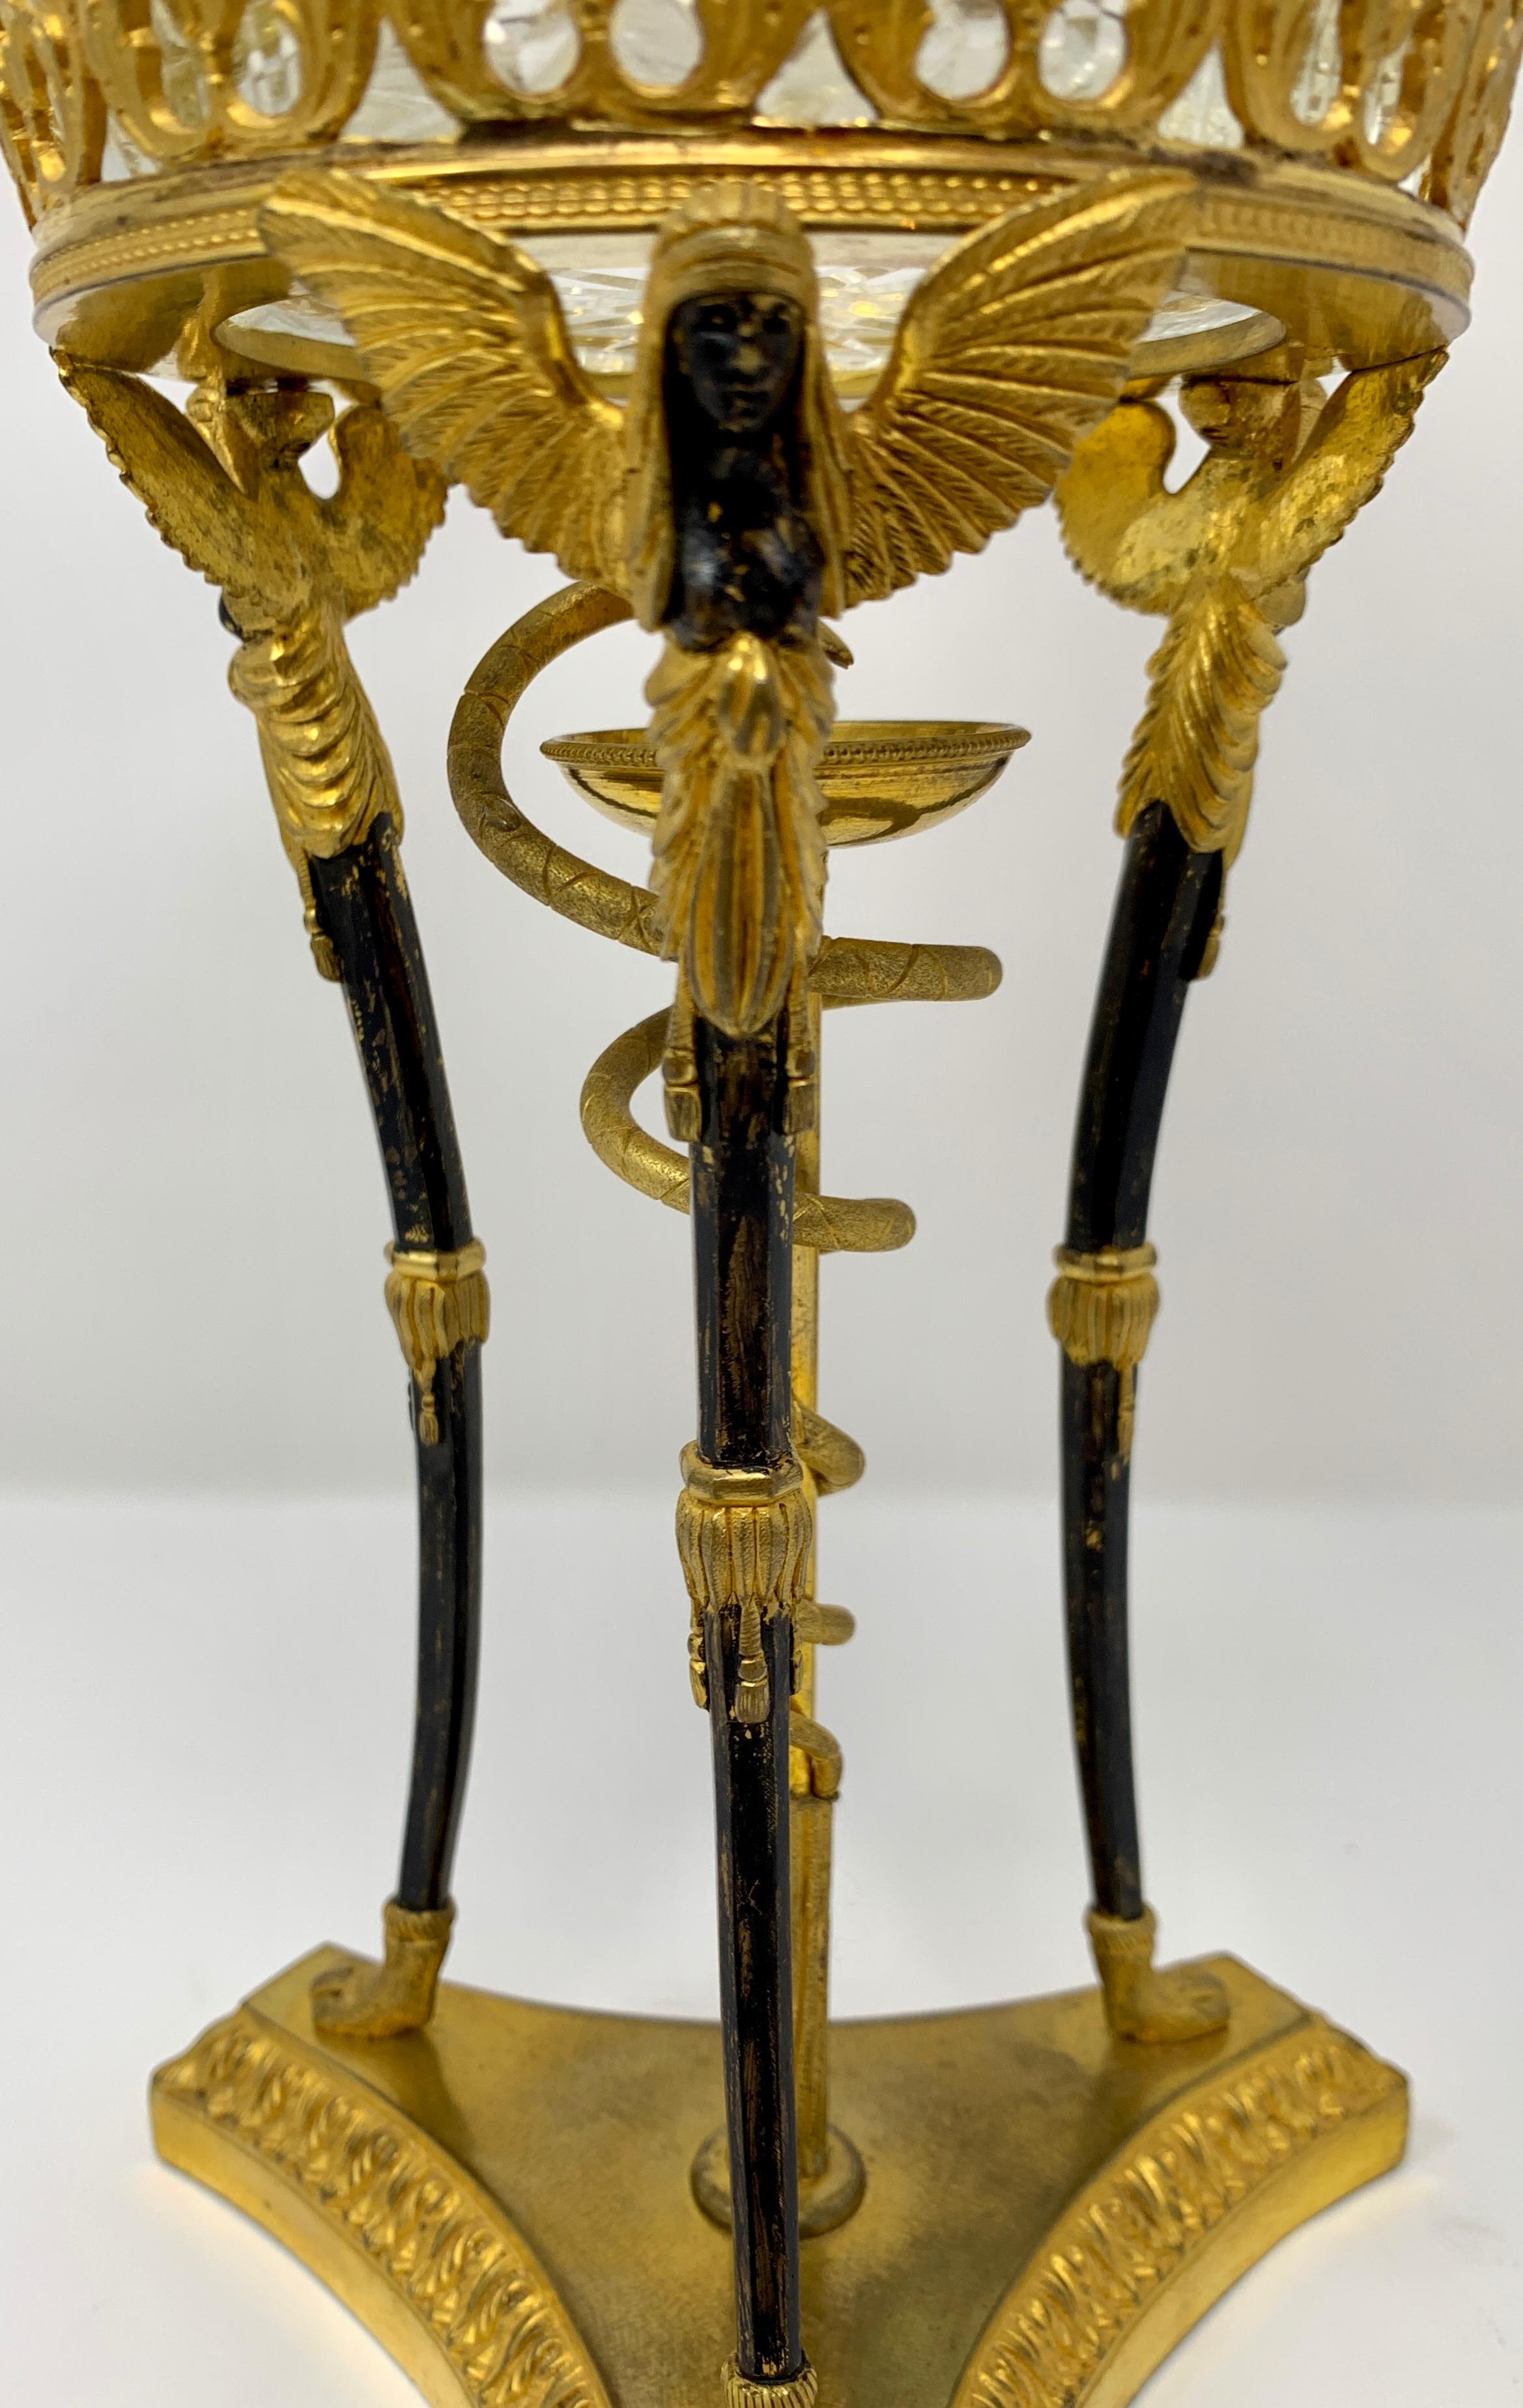 Antique French Empire Period Crystal and Ormolu Centerpiece with Figural Serpent and Sphinxes, Circa 1815-1825.